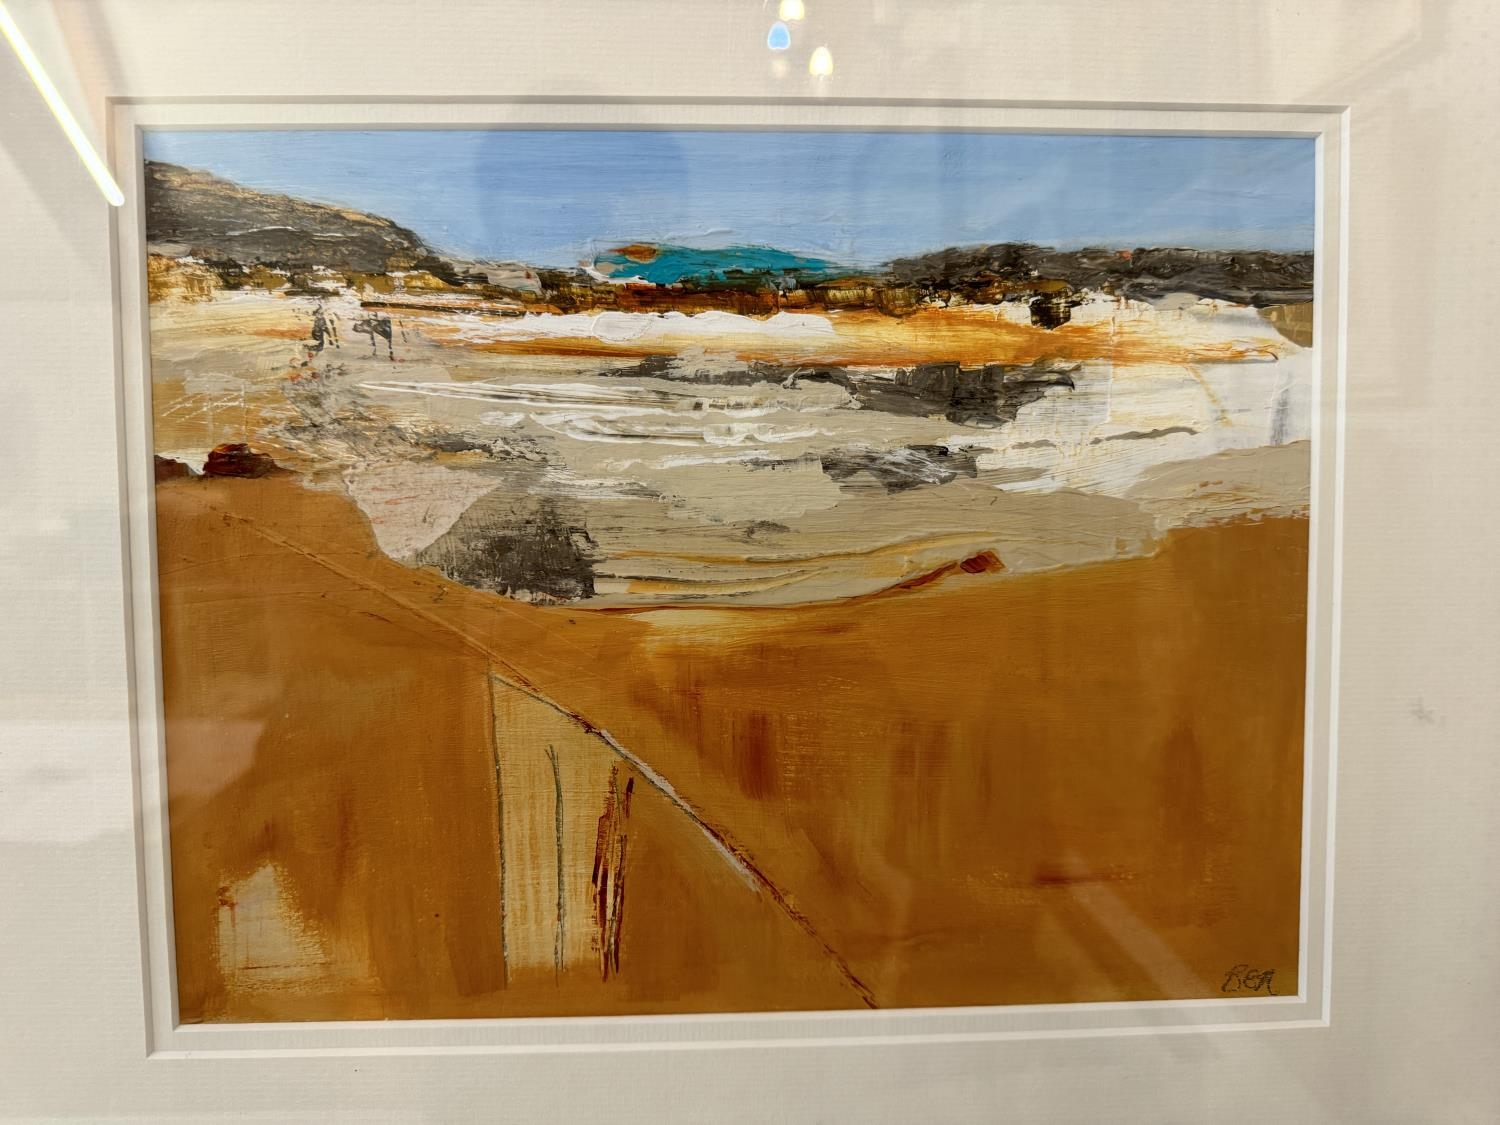 Bea Thompson - 'Fowey Estuary I' (2003), signed lower right, with title, medium and date inscribed - Image 2 of 6